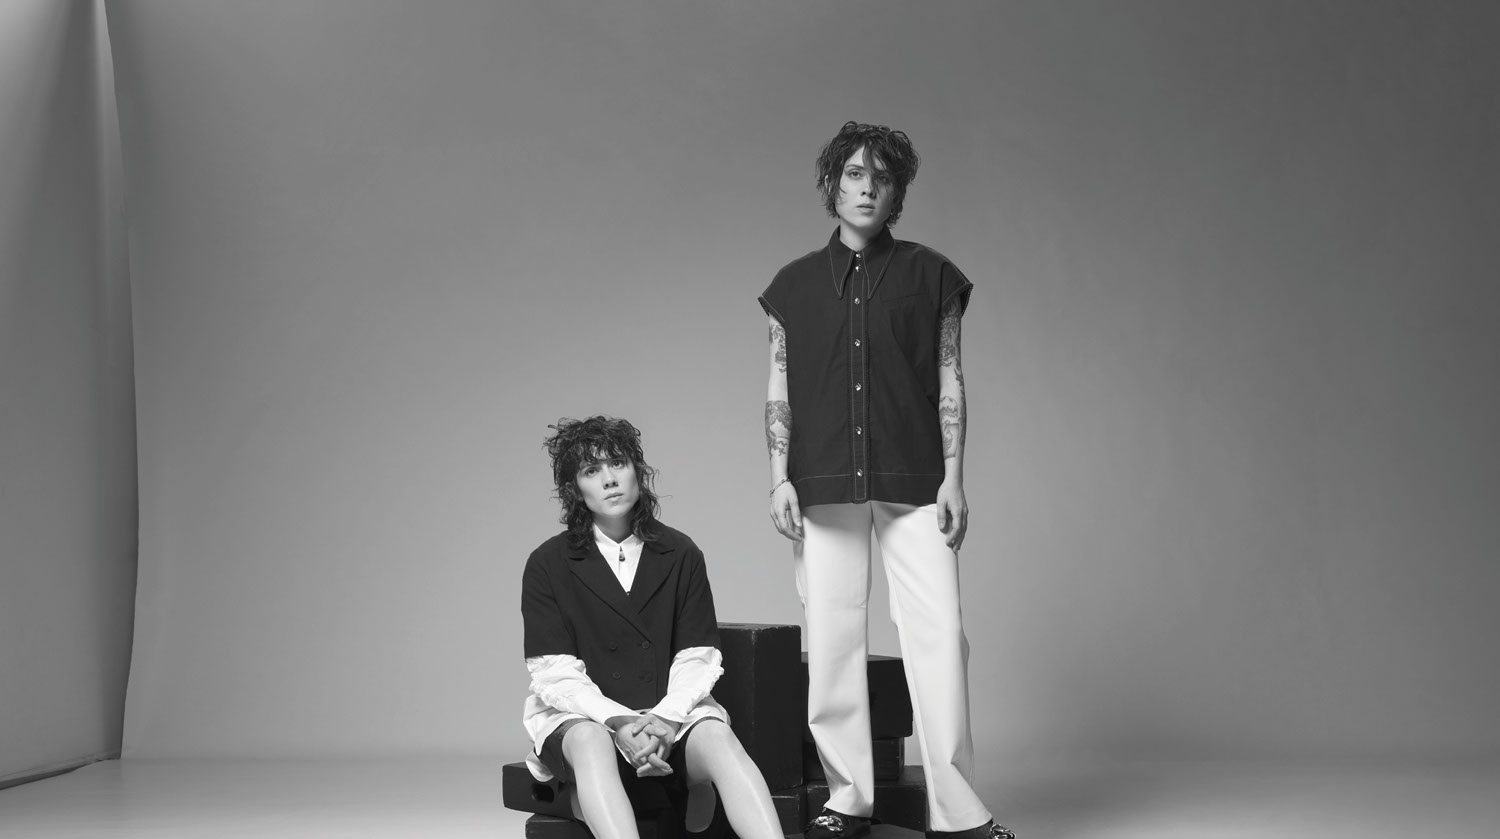 A black and white image of Tegan and Sara before a plain backdrop. The woman to the left is seated atop two black boxes. She has light-toned skin and shoulder-length curly hair with bangs. She wears a black jacket with buttons, on top of a white long-sleeve shirt. The other woman stands to the right of her. She has pale-toned skin and short hair. She wears a black vest, white pants and has several tattoos on both of her arms.